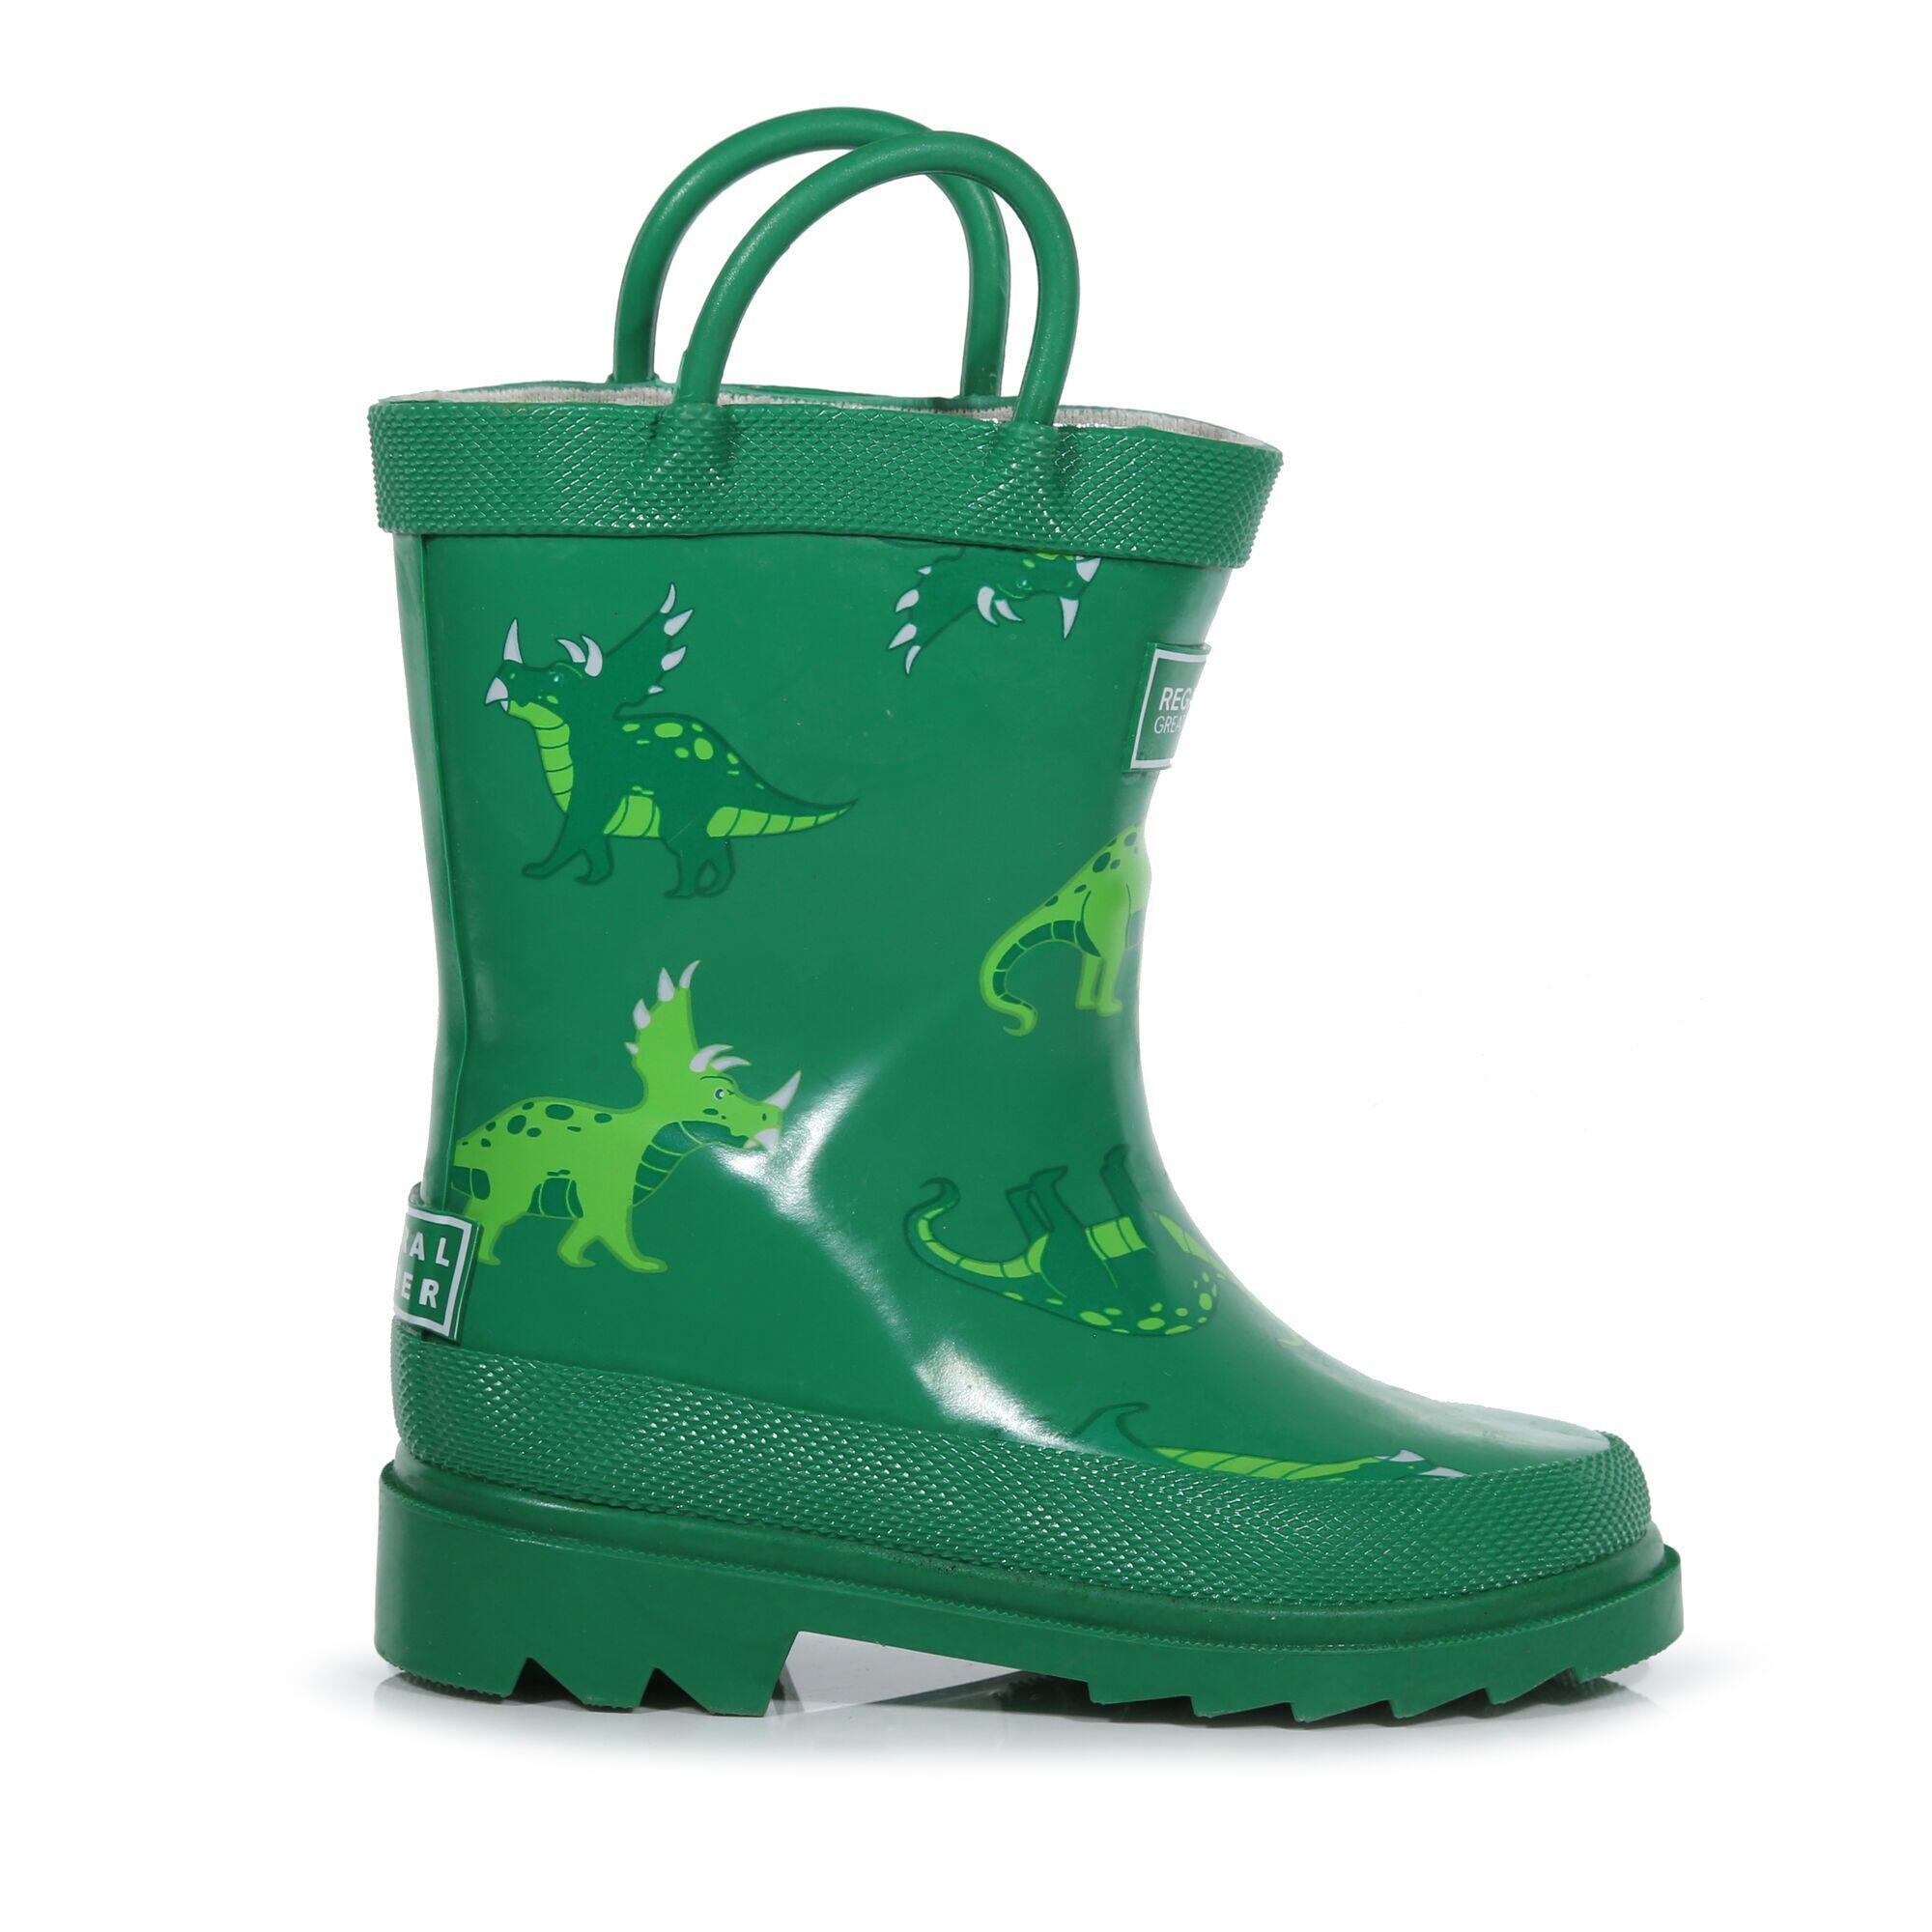 Great Outdoors Childrens/Kids Minnow Patterned Wellington Boots (Jellybean 4/5